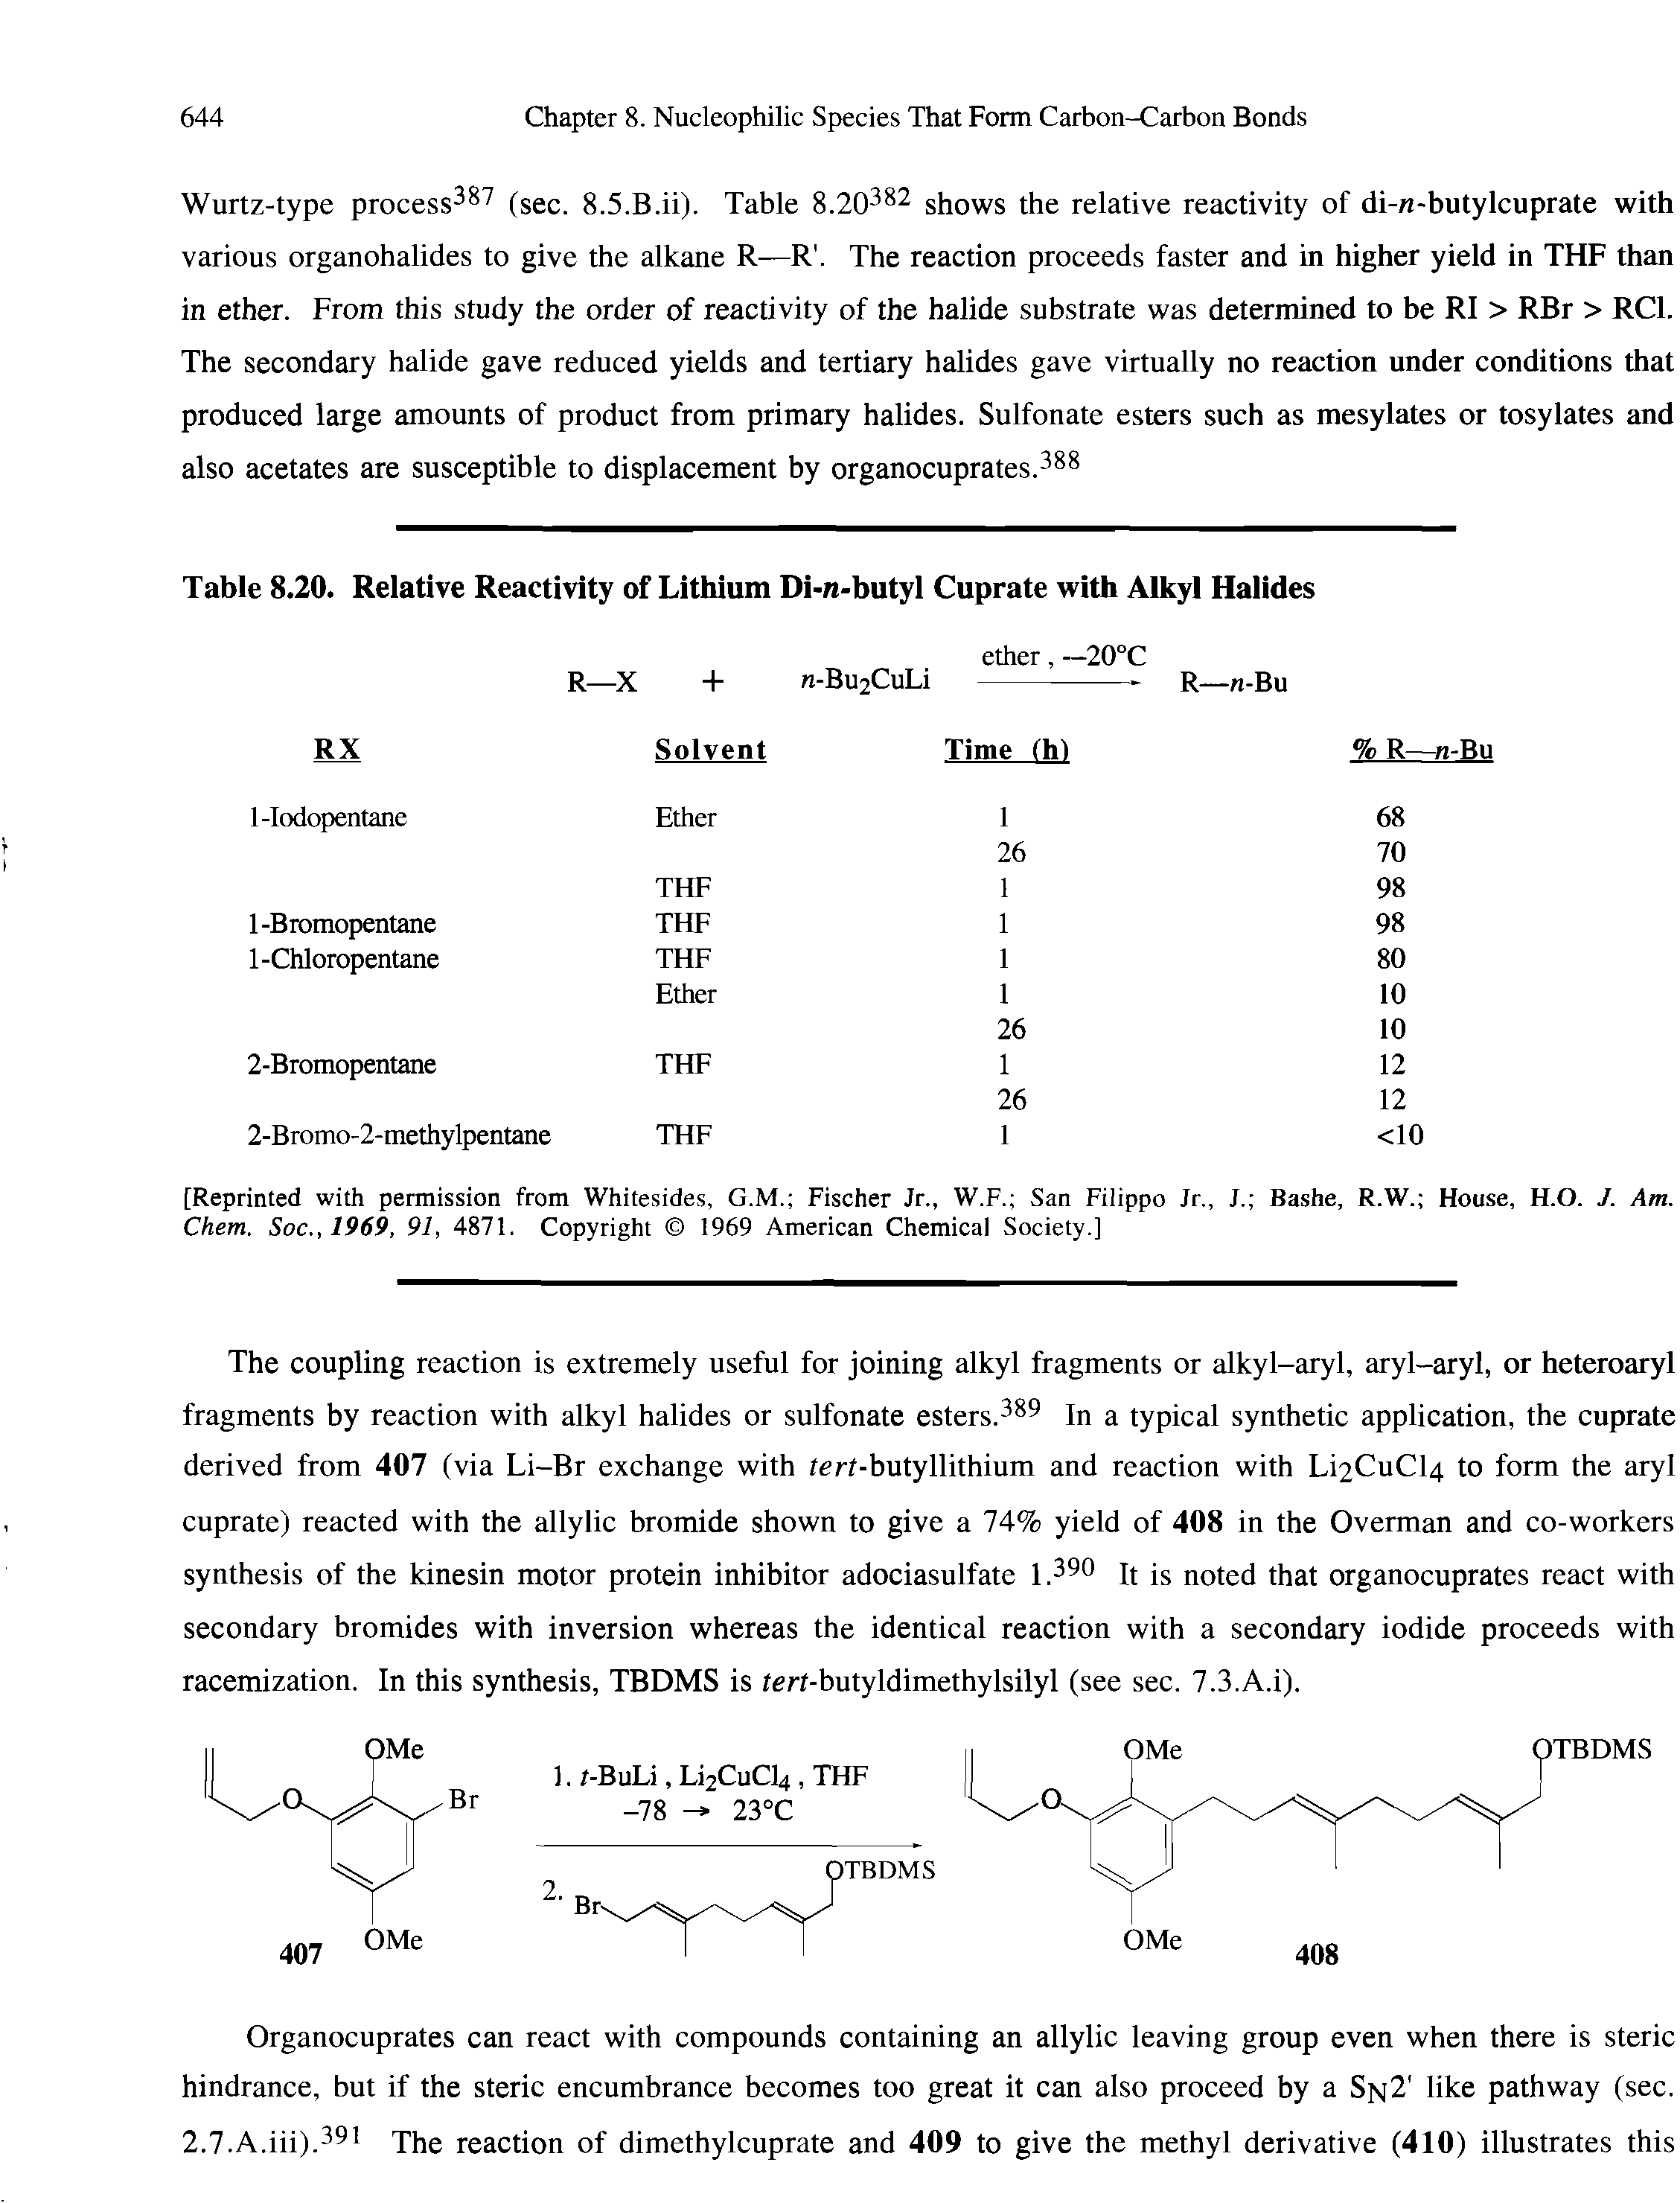 Table 8.20. Relative Reactivity of Lithium Di-ra-butyl Cuprate with Alkyl Halides...